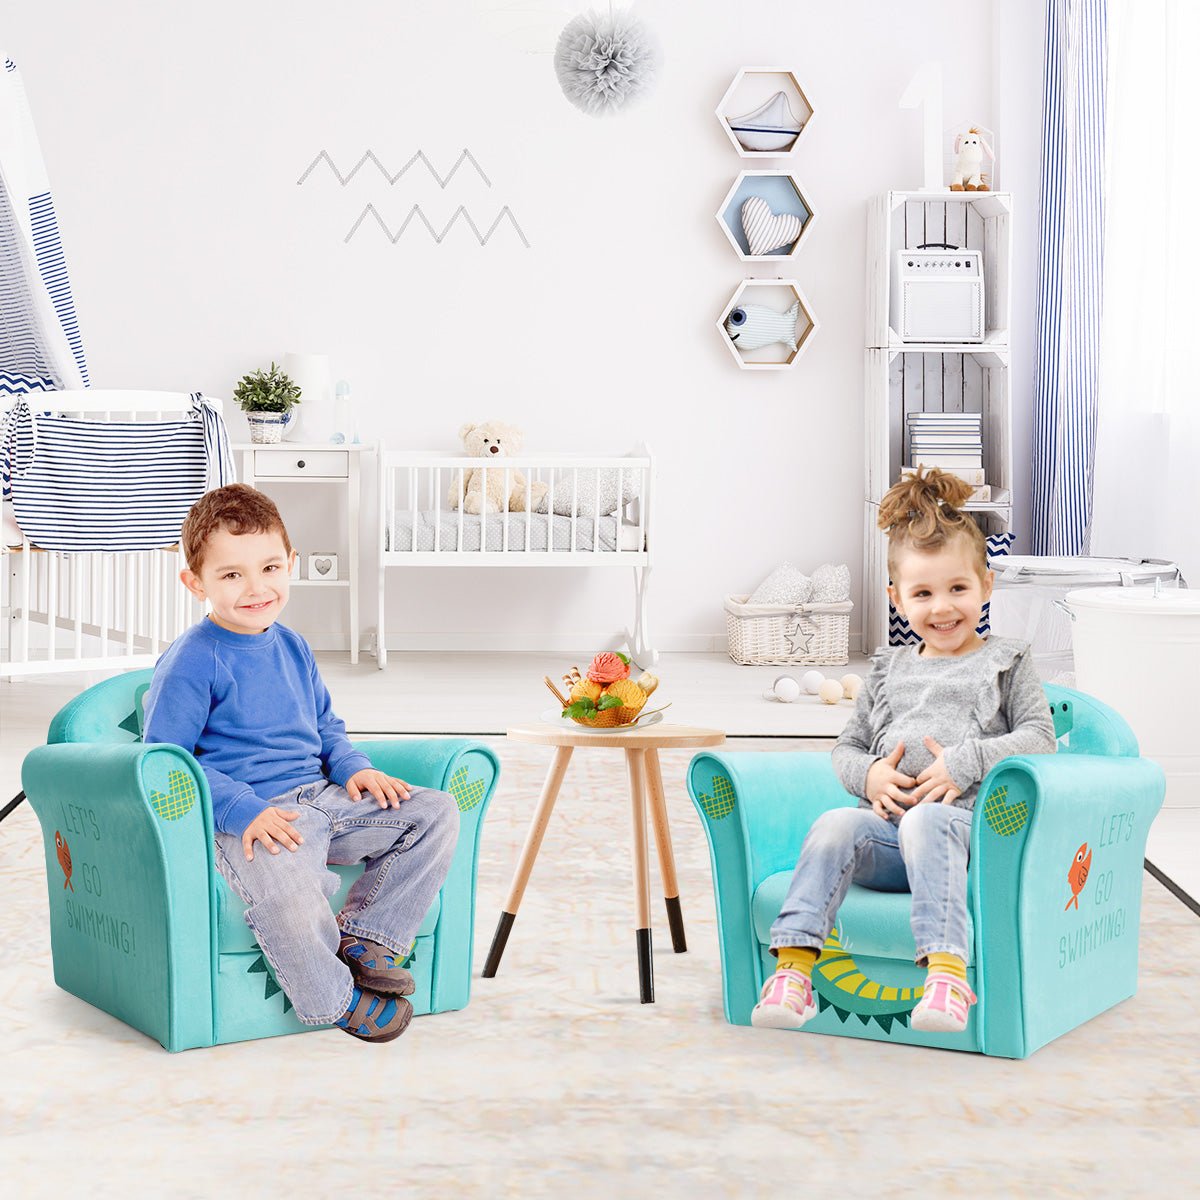 Children's Armchair: Crocodile Pattern and Wooden Frame Comfort for Baby Room